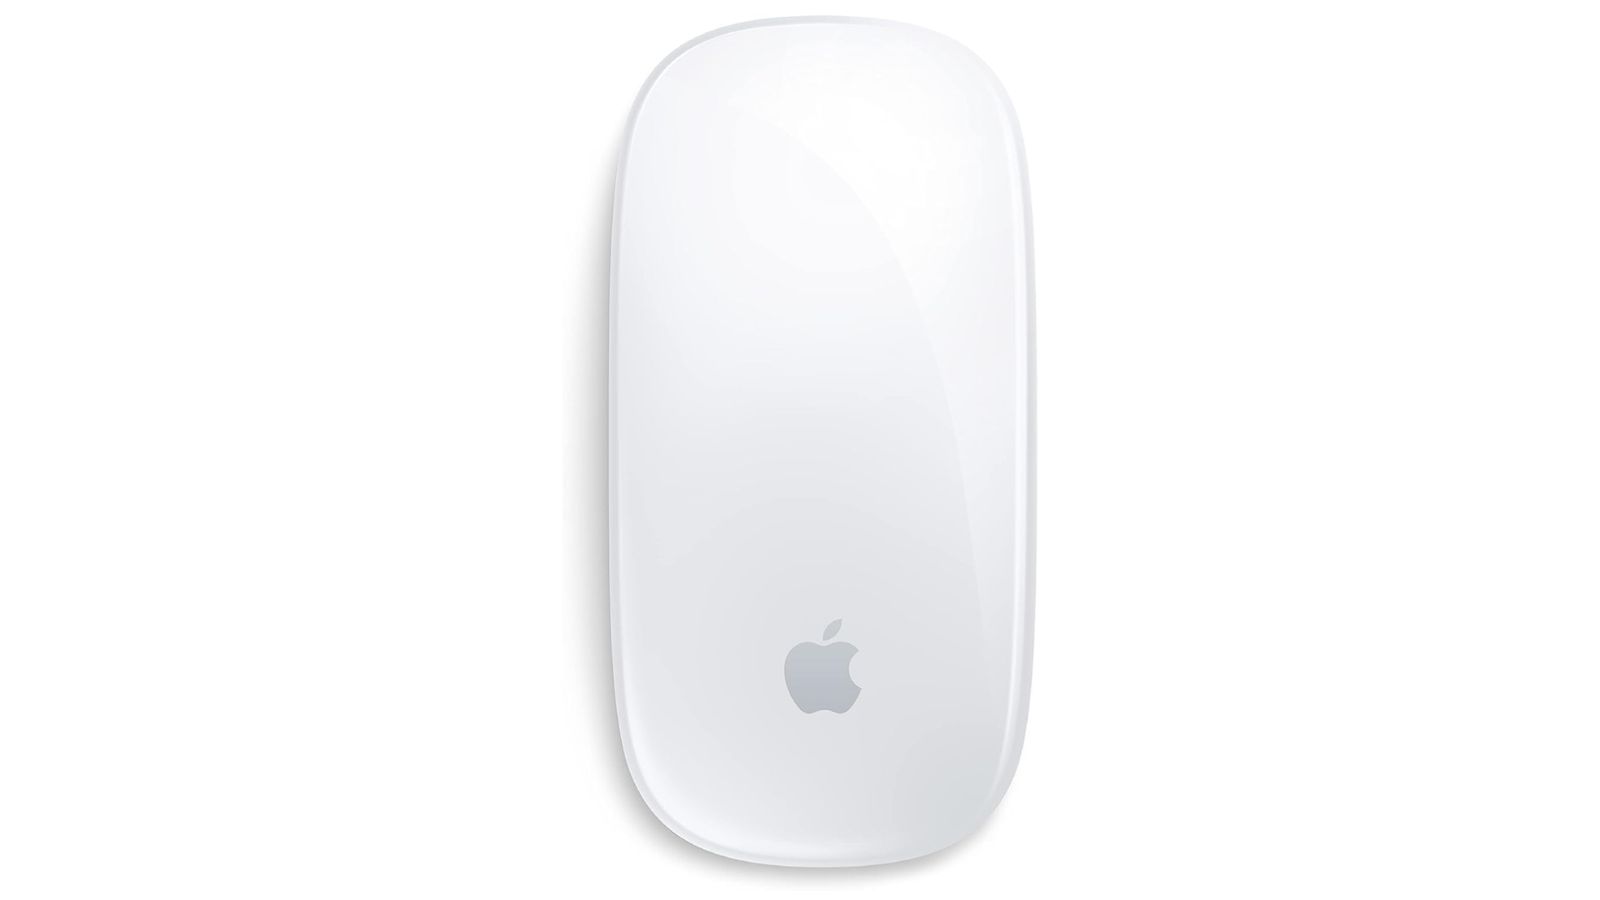 Apple Magic Mouse product image of a white wireless mouse with the Apple logo in grey at the bottom.